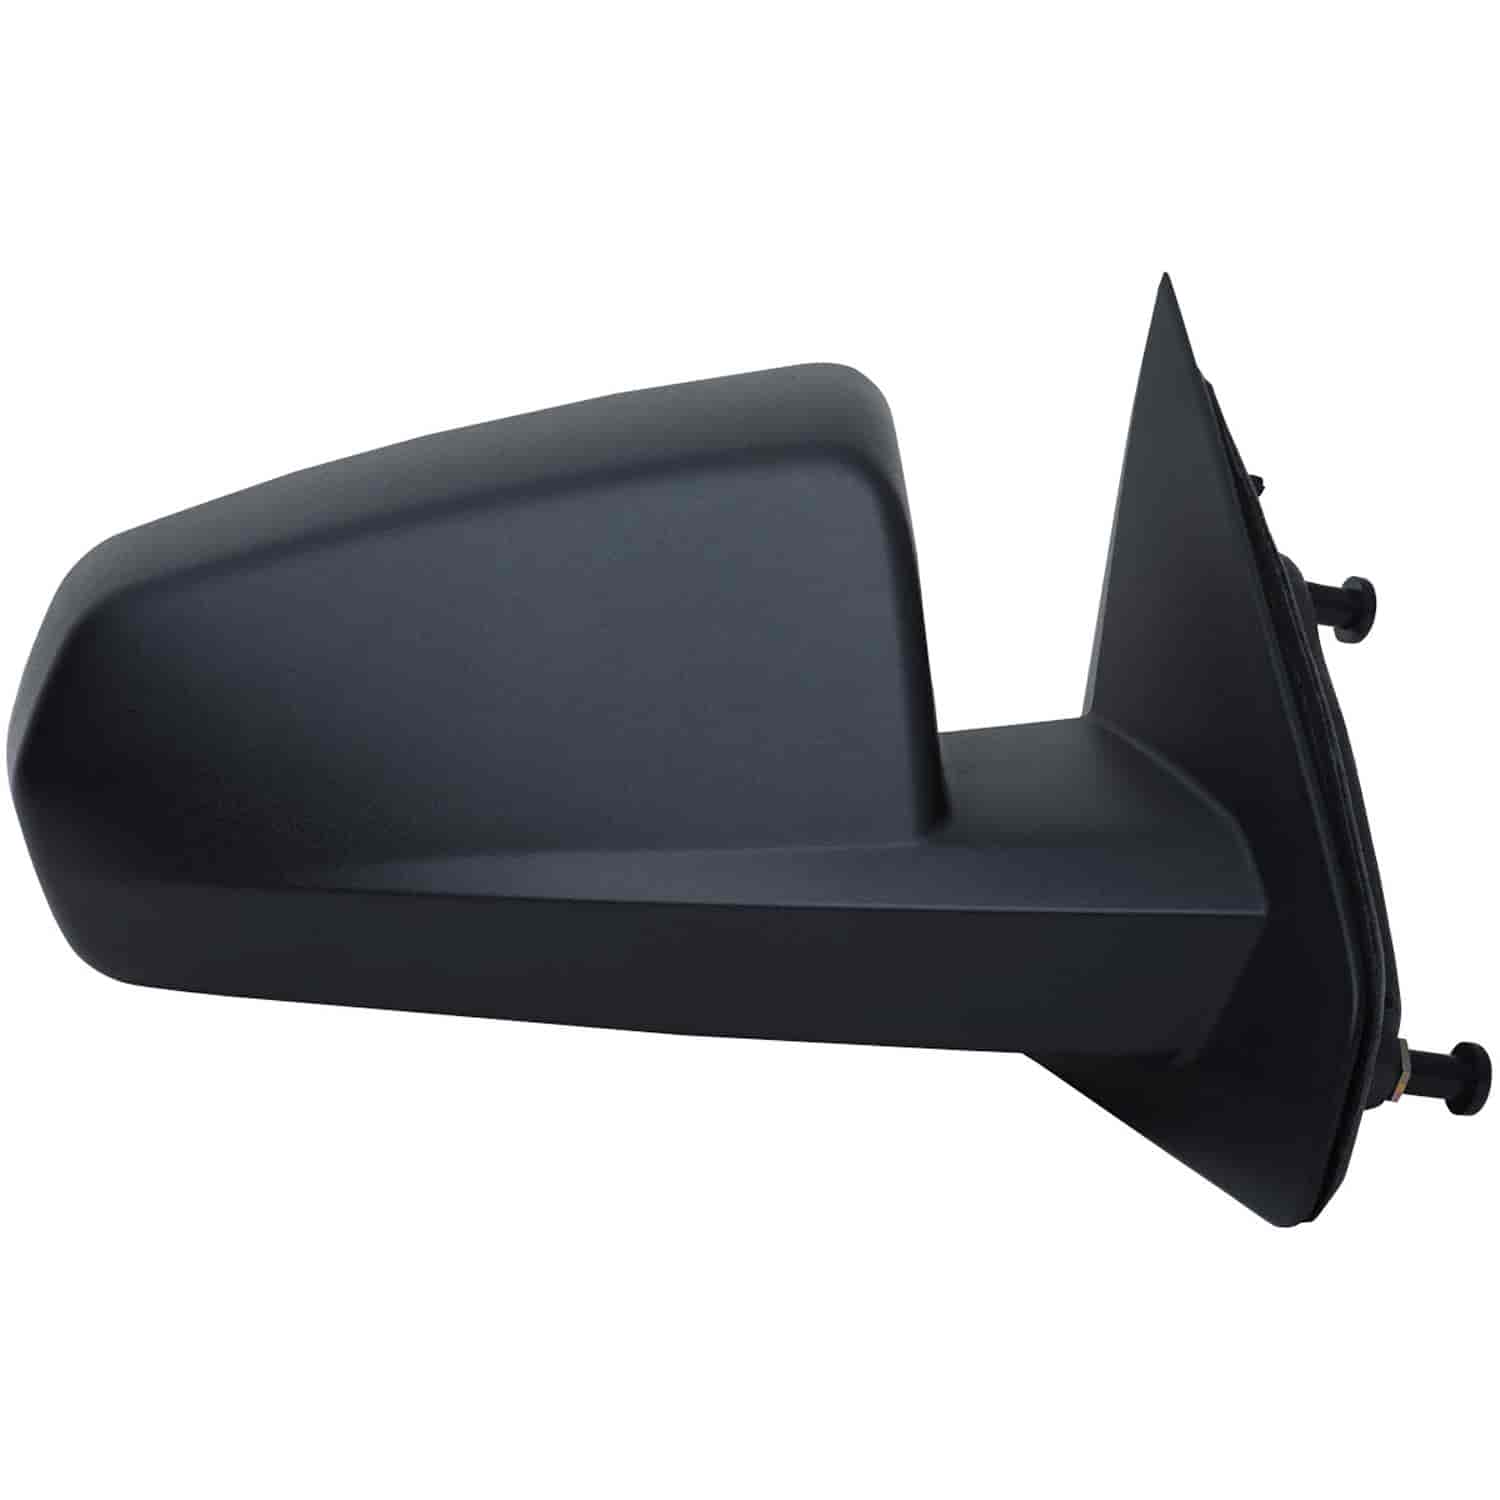 OEM Style Replacement mirror for 08-14 Dodge Avenger